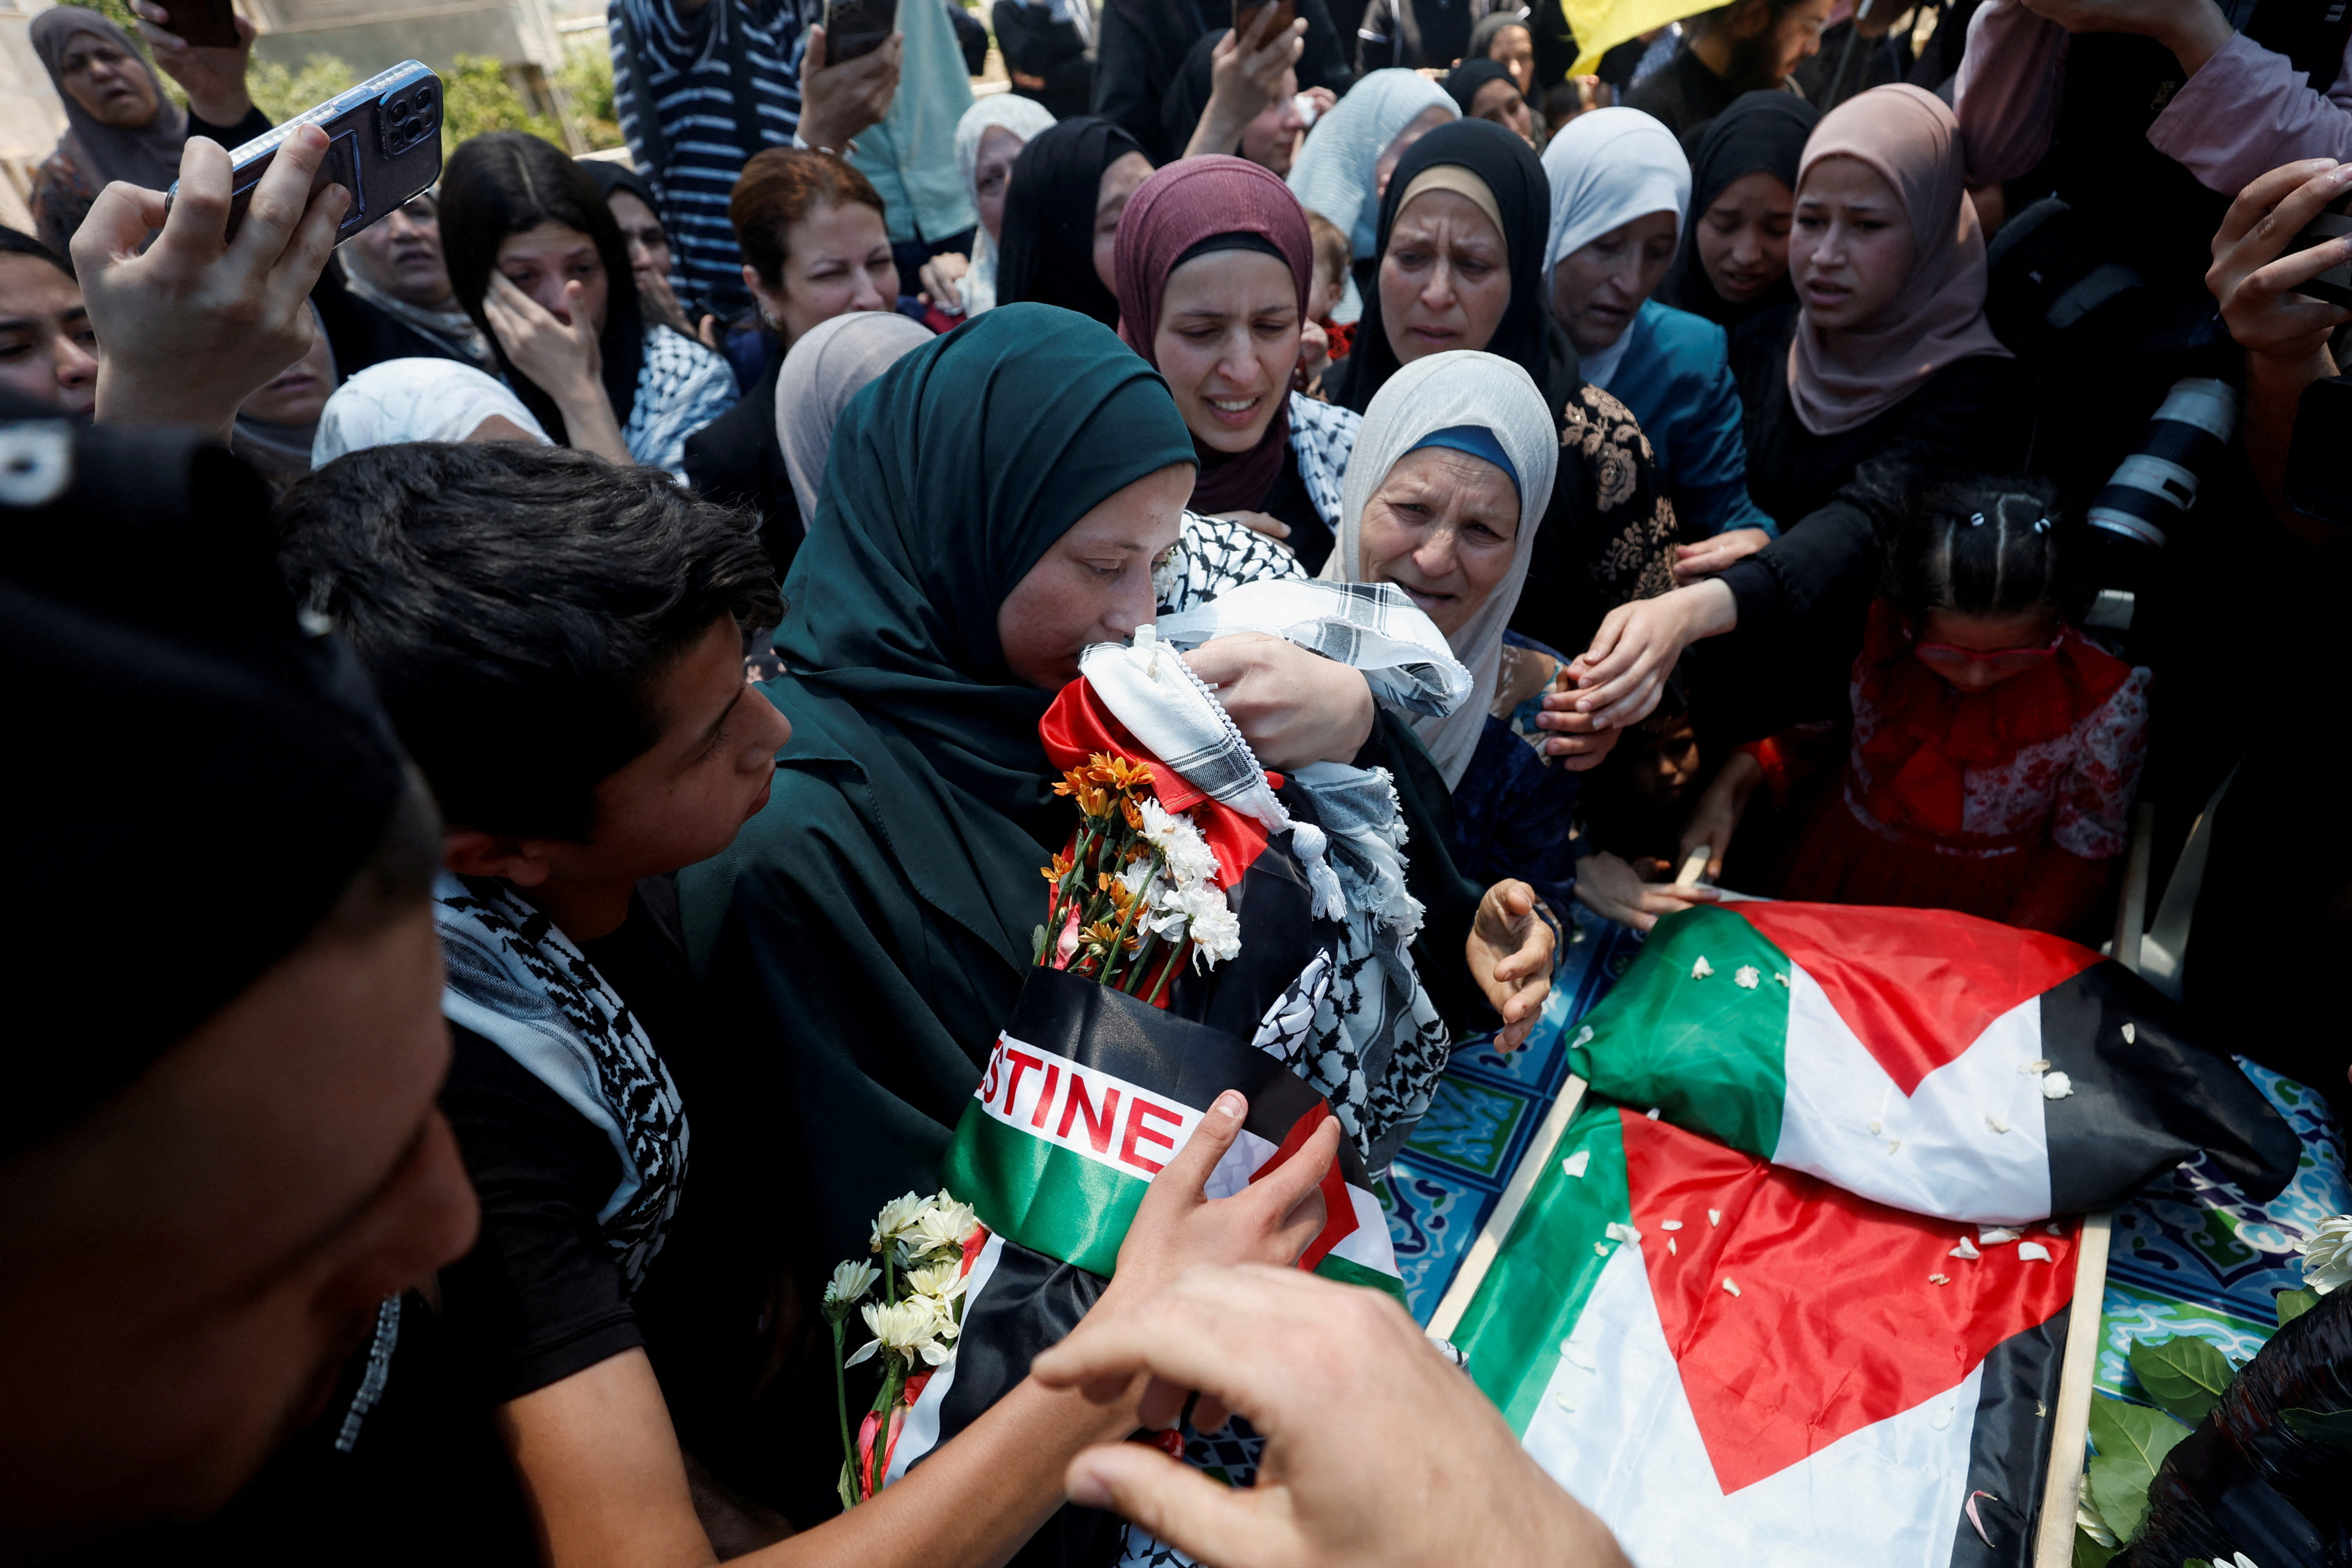 Funeral of Palestinian boy Mohammad al-Tamimi who was shot by Israeli forces, near Ramallah